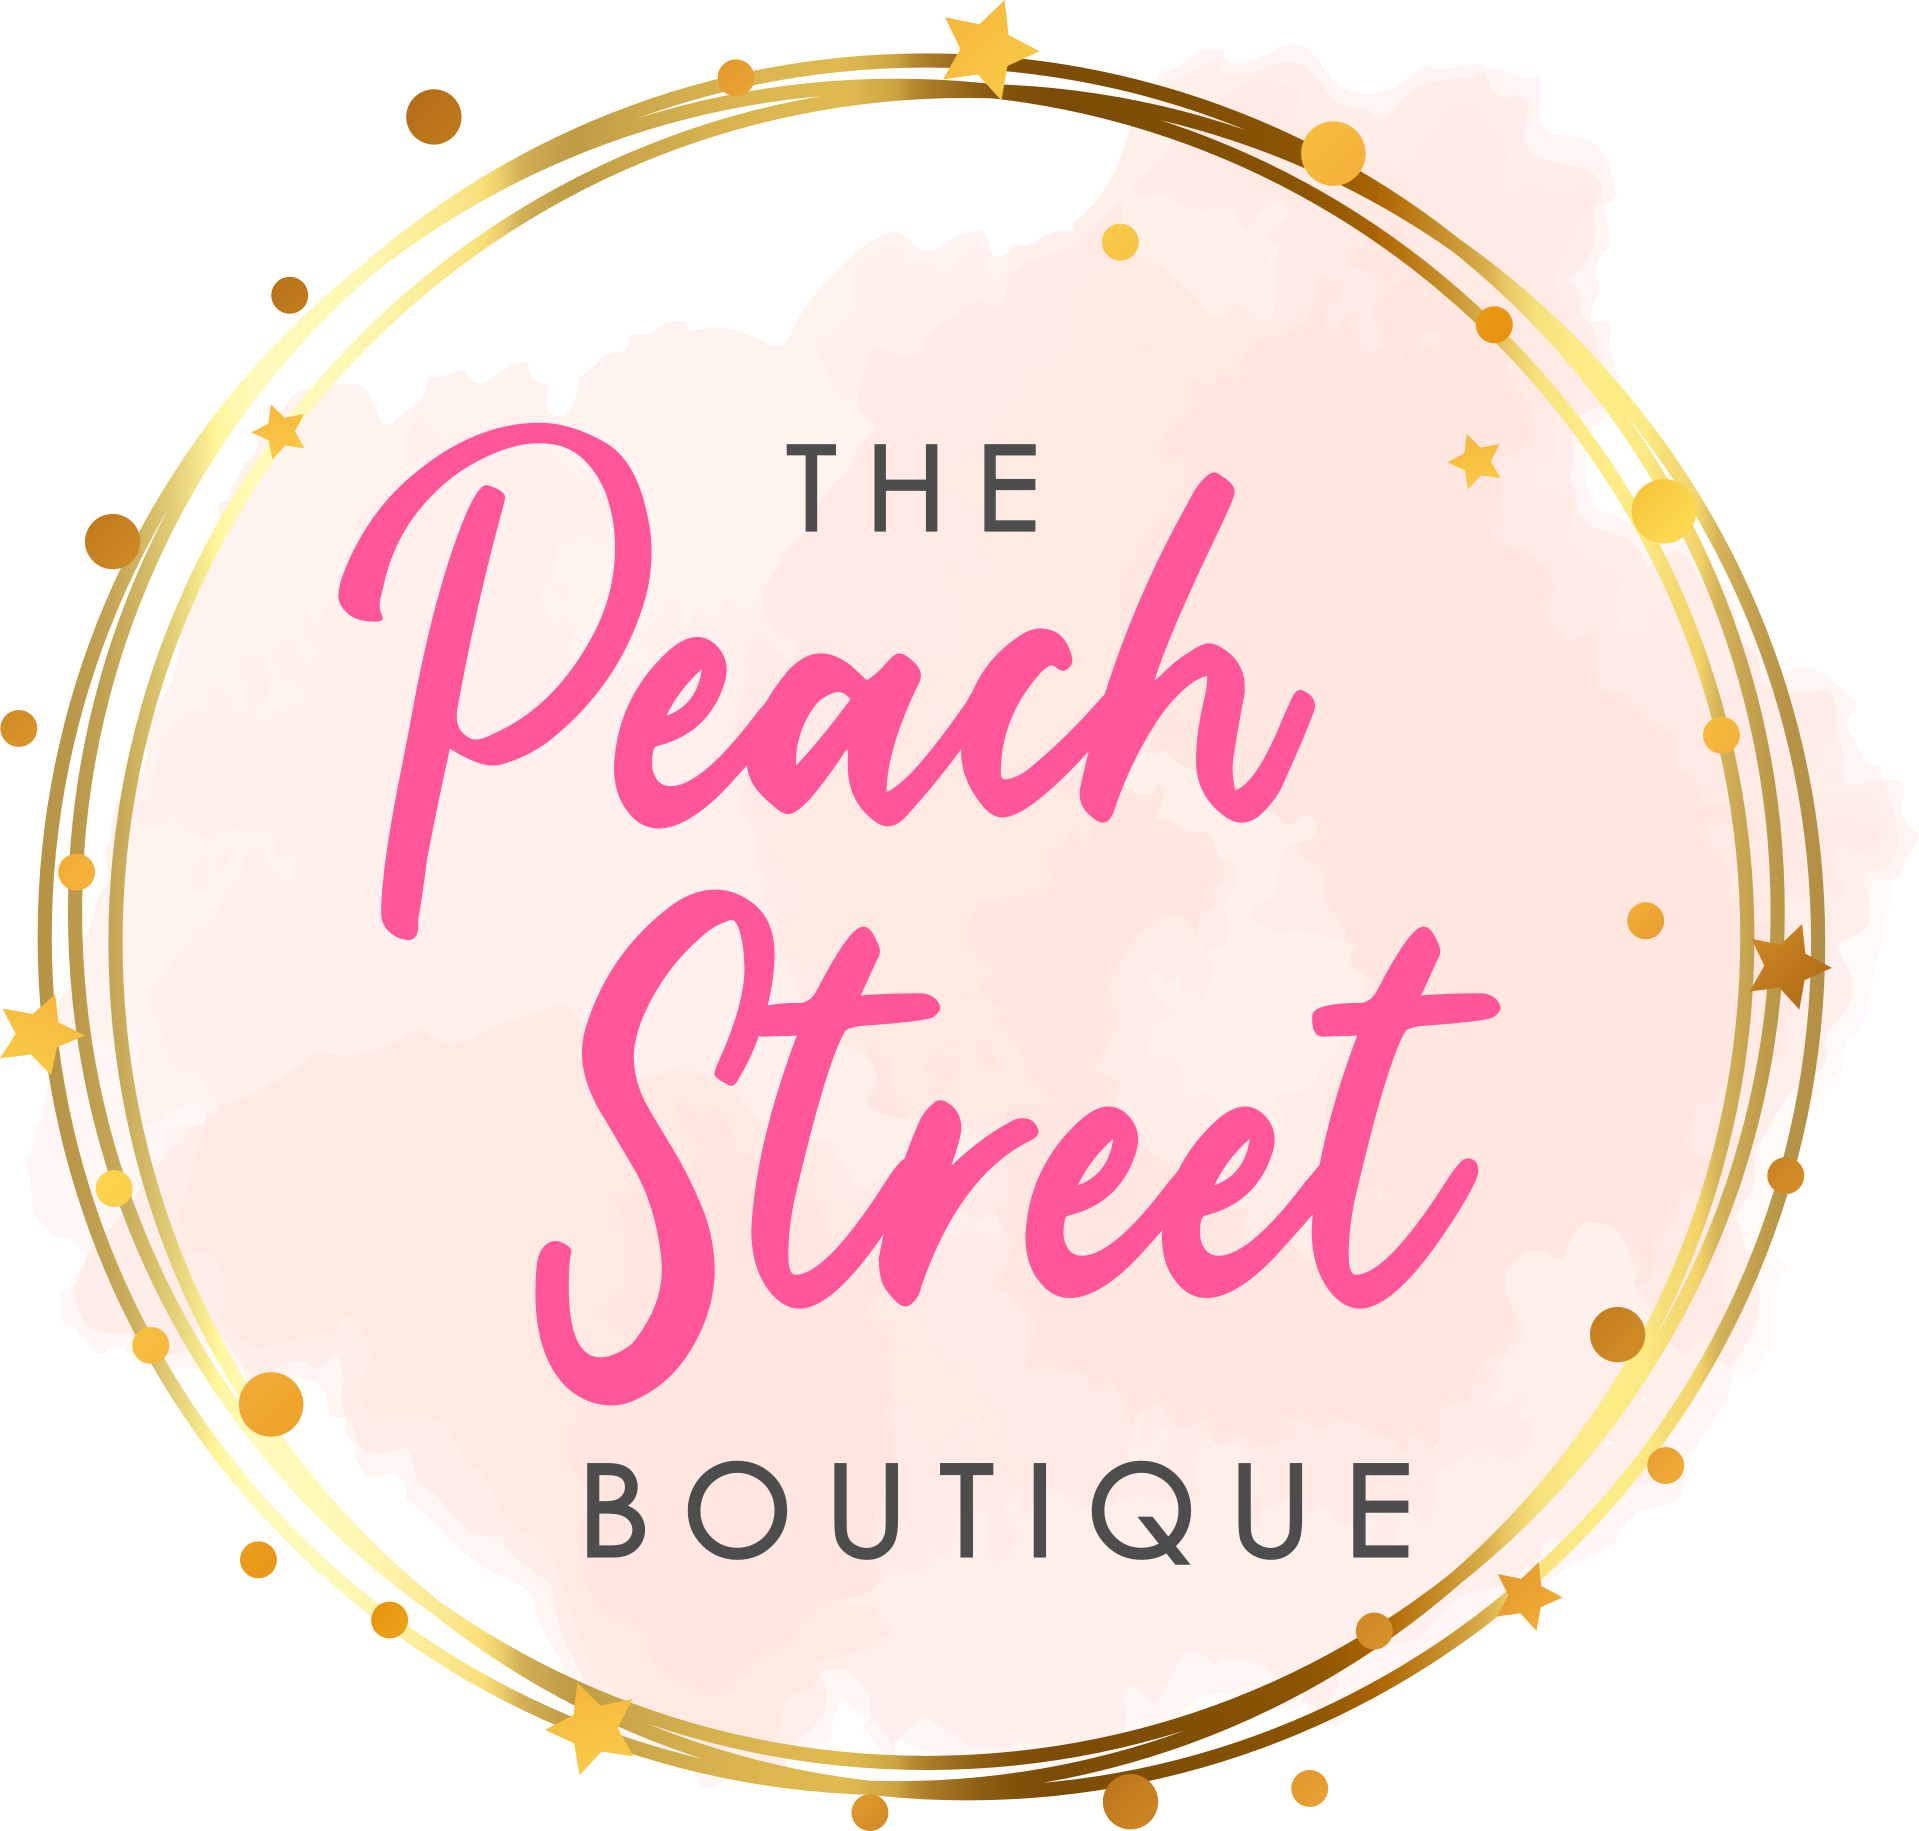 Return Policy – The Peach Street Boutique